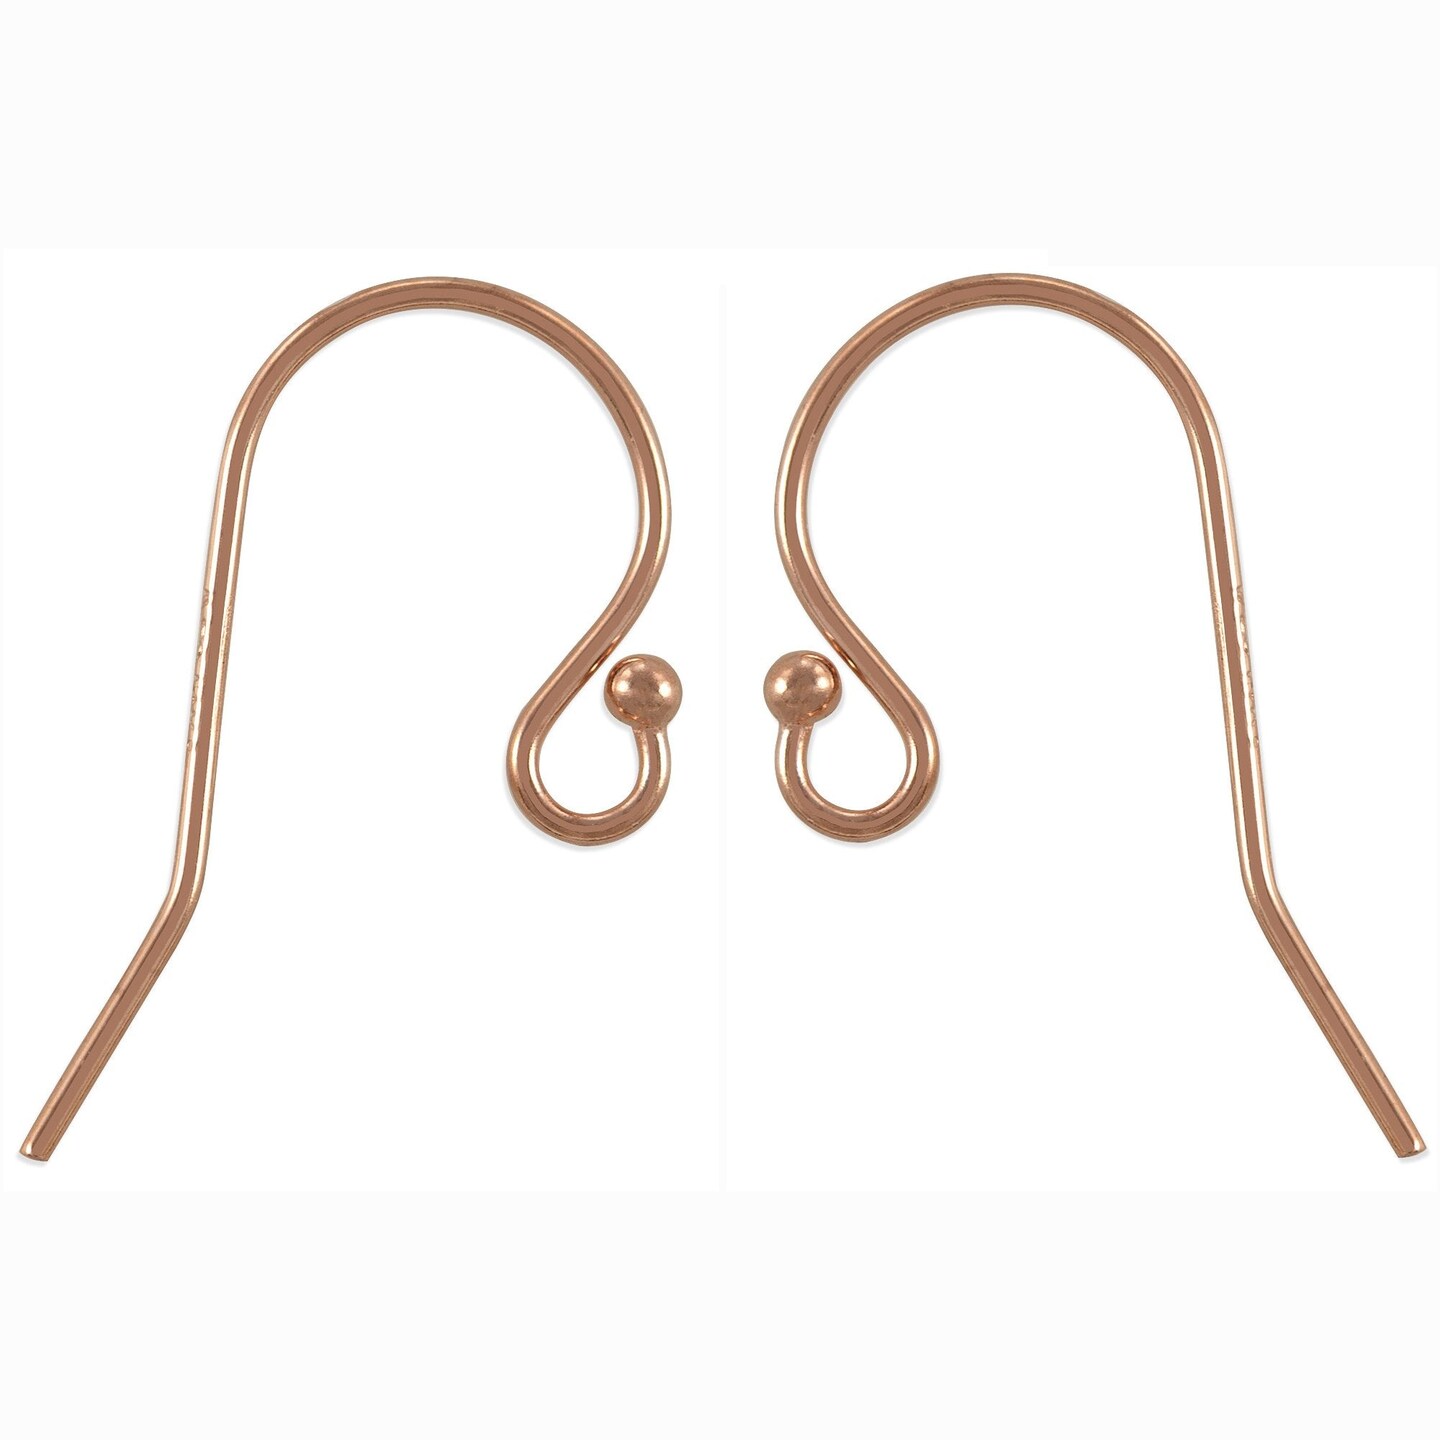 JewelrySupply Rose Gold Filled Earring Wires with Ball End (1 Pair